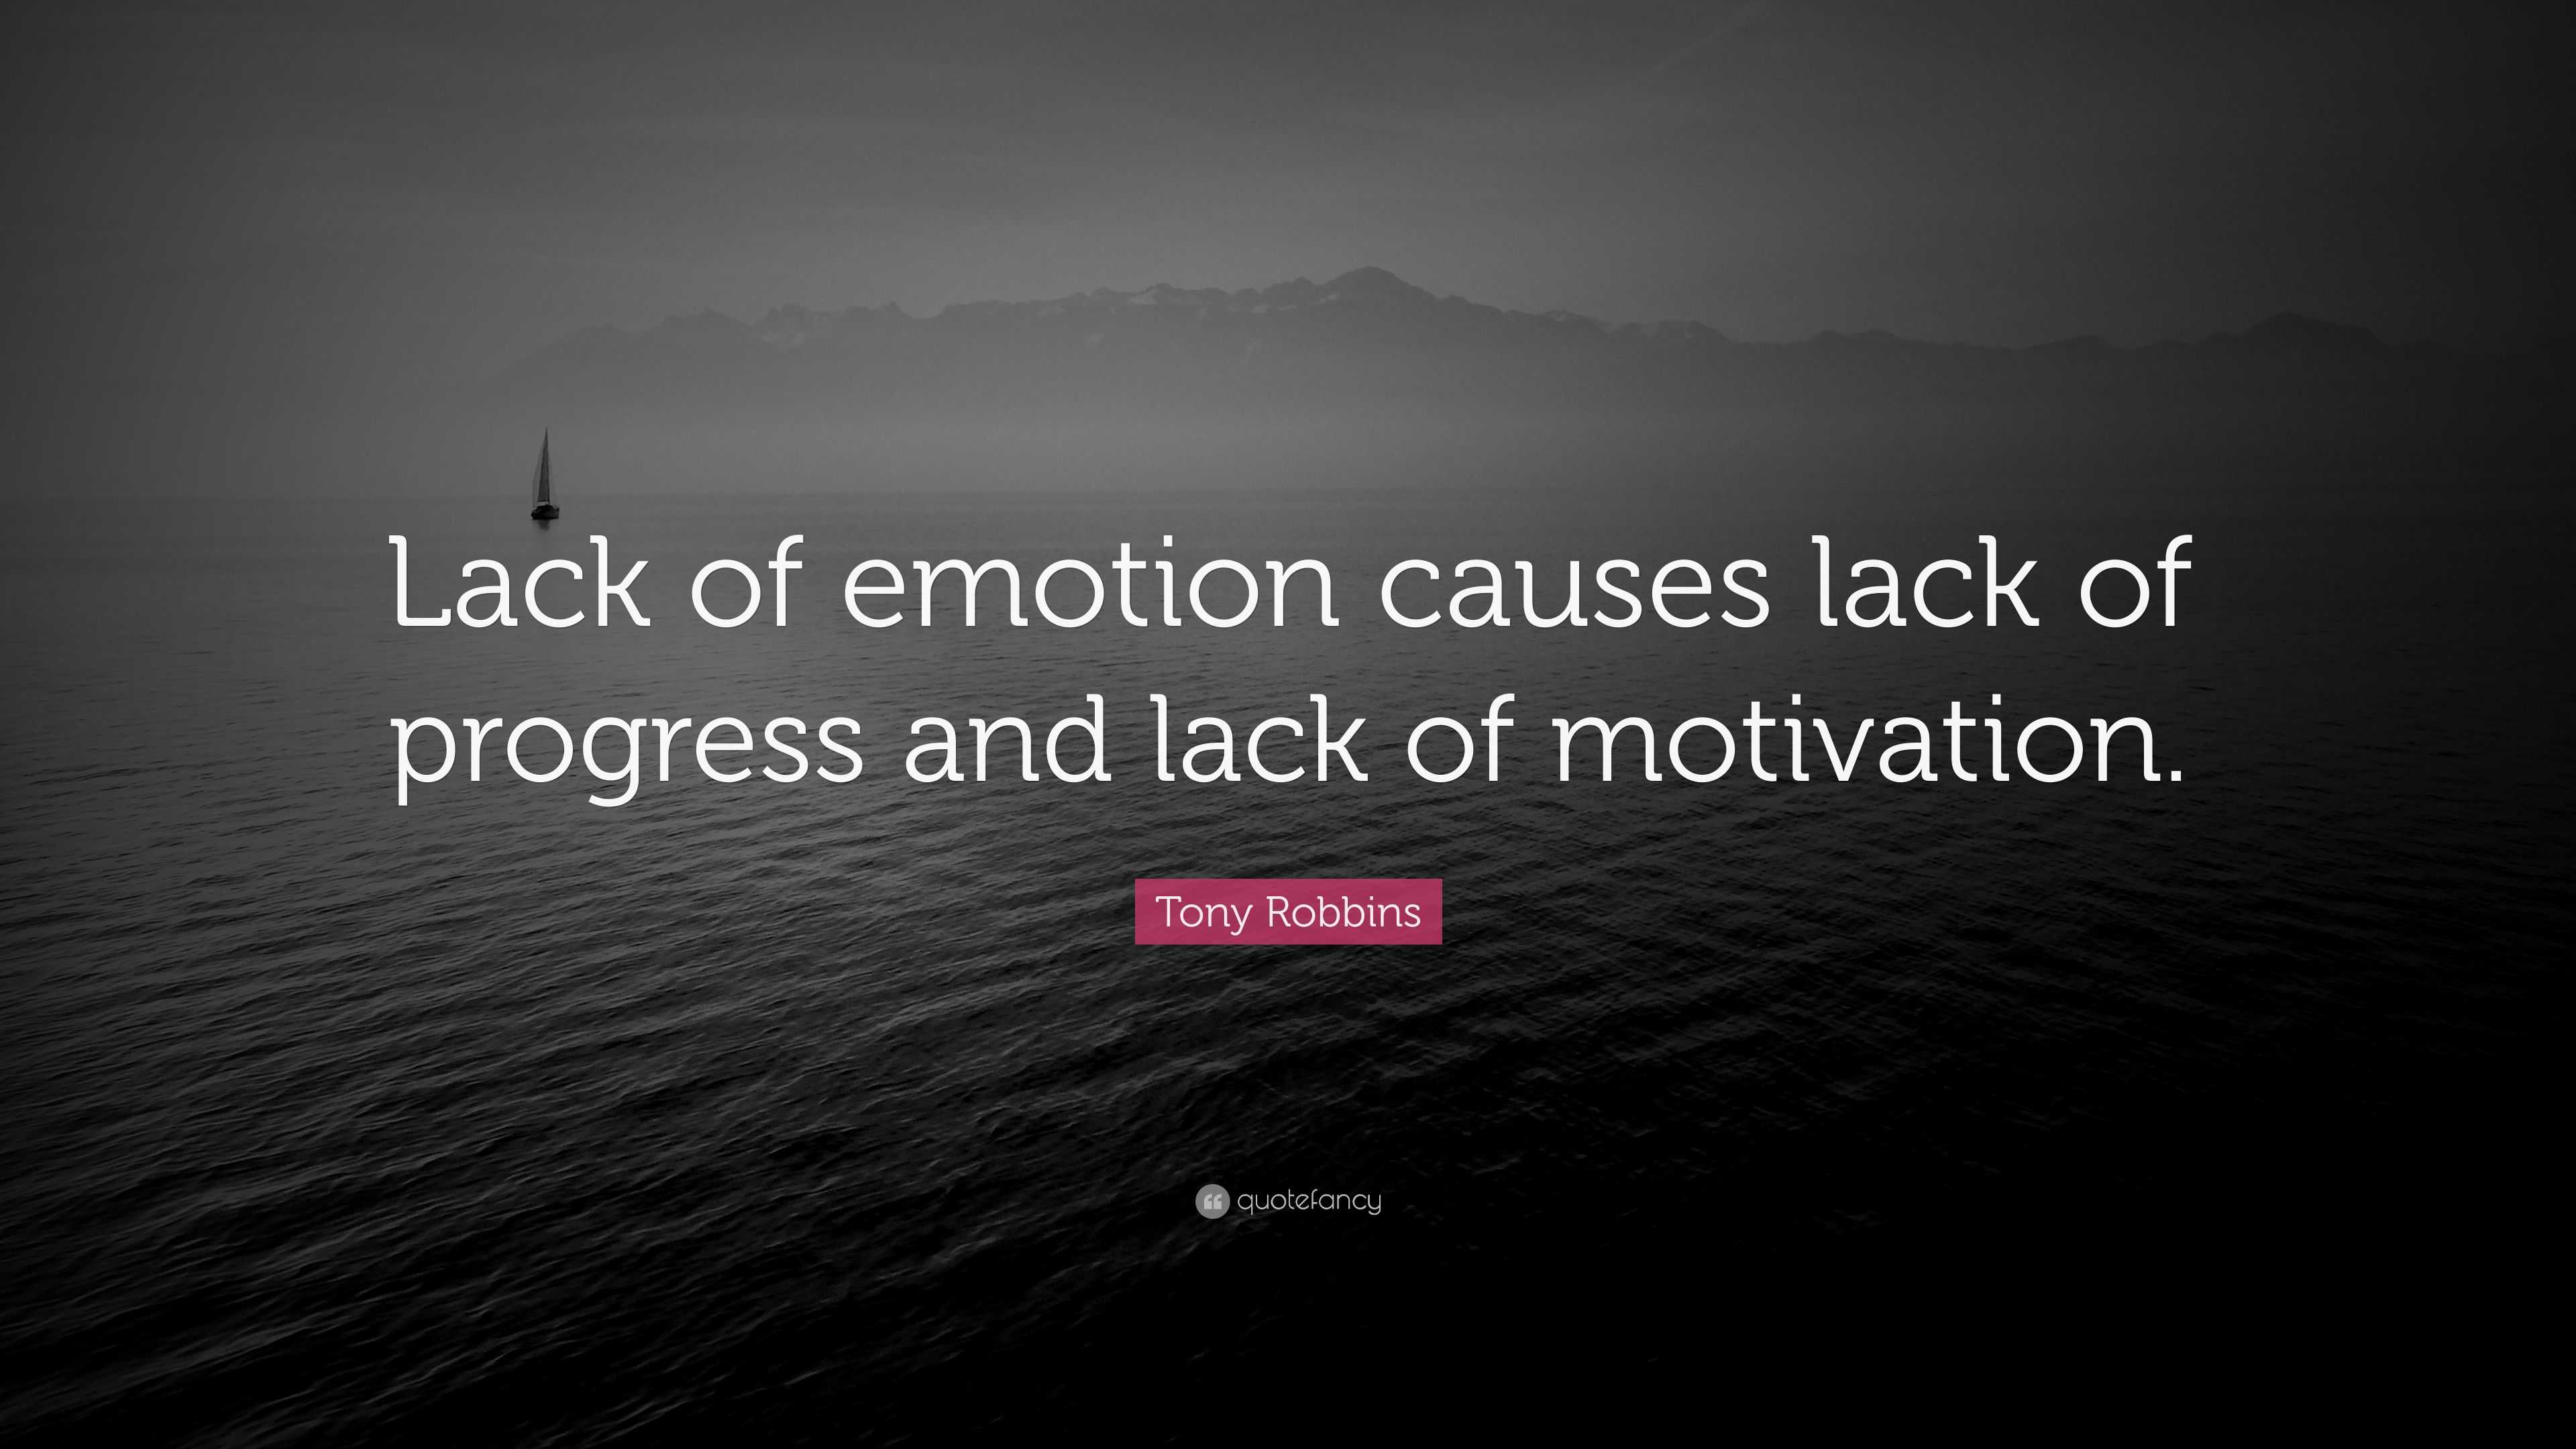 Tony Robbins Quote: “Lack of emotion causes lack of progress and lack